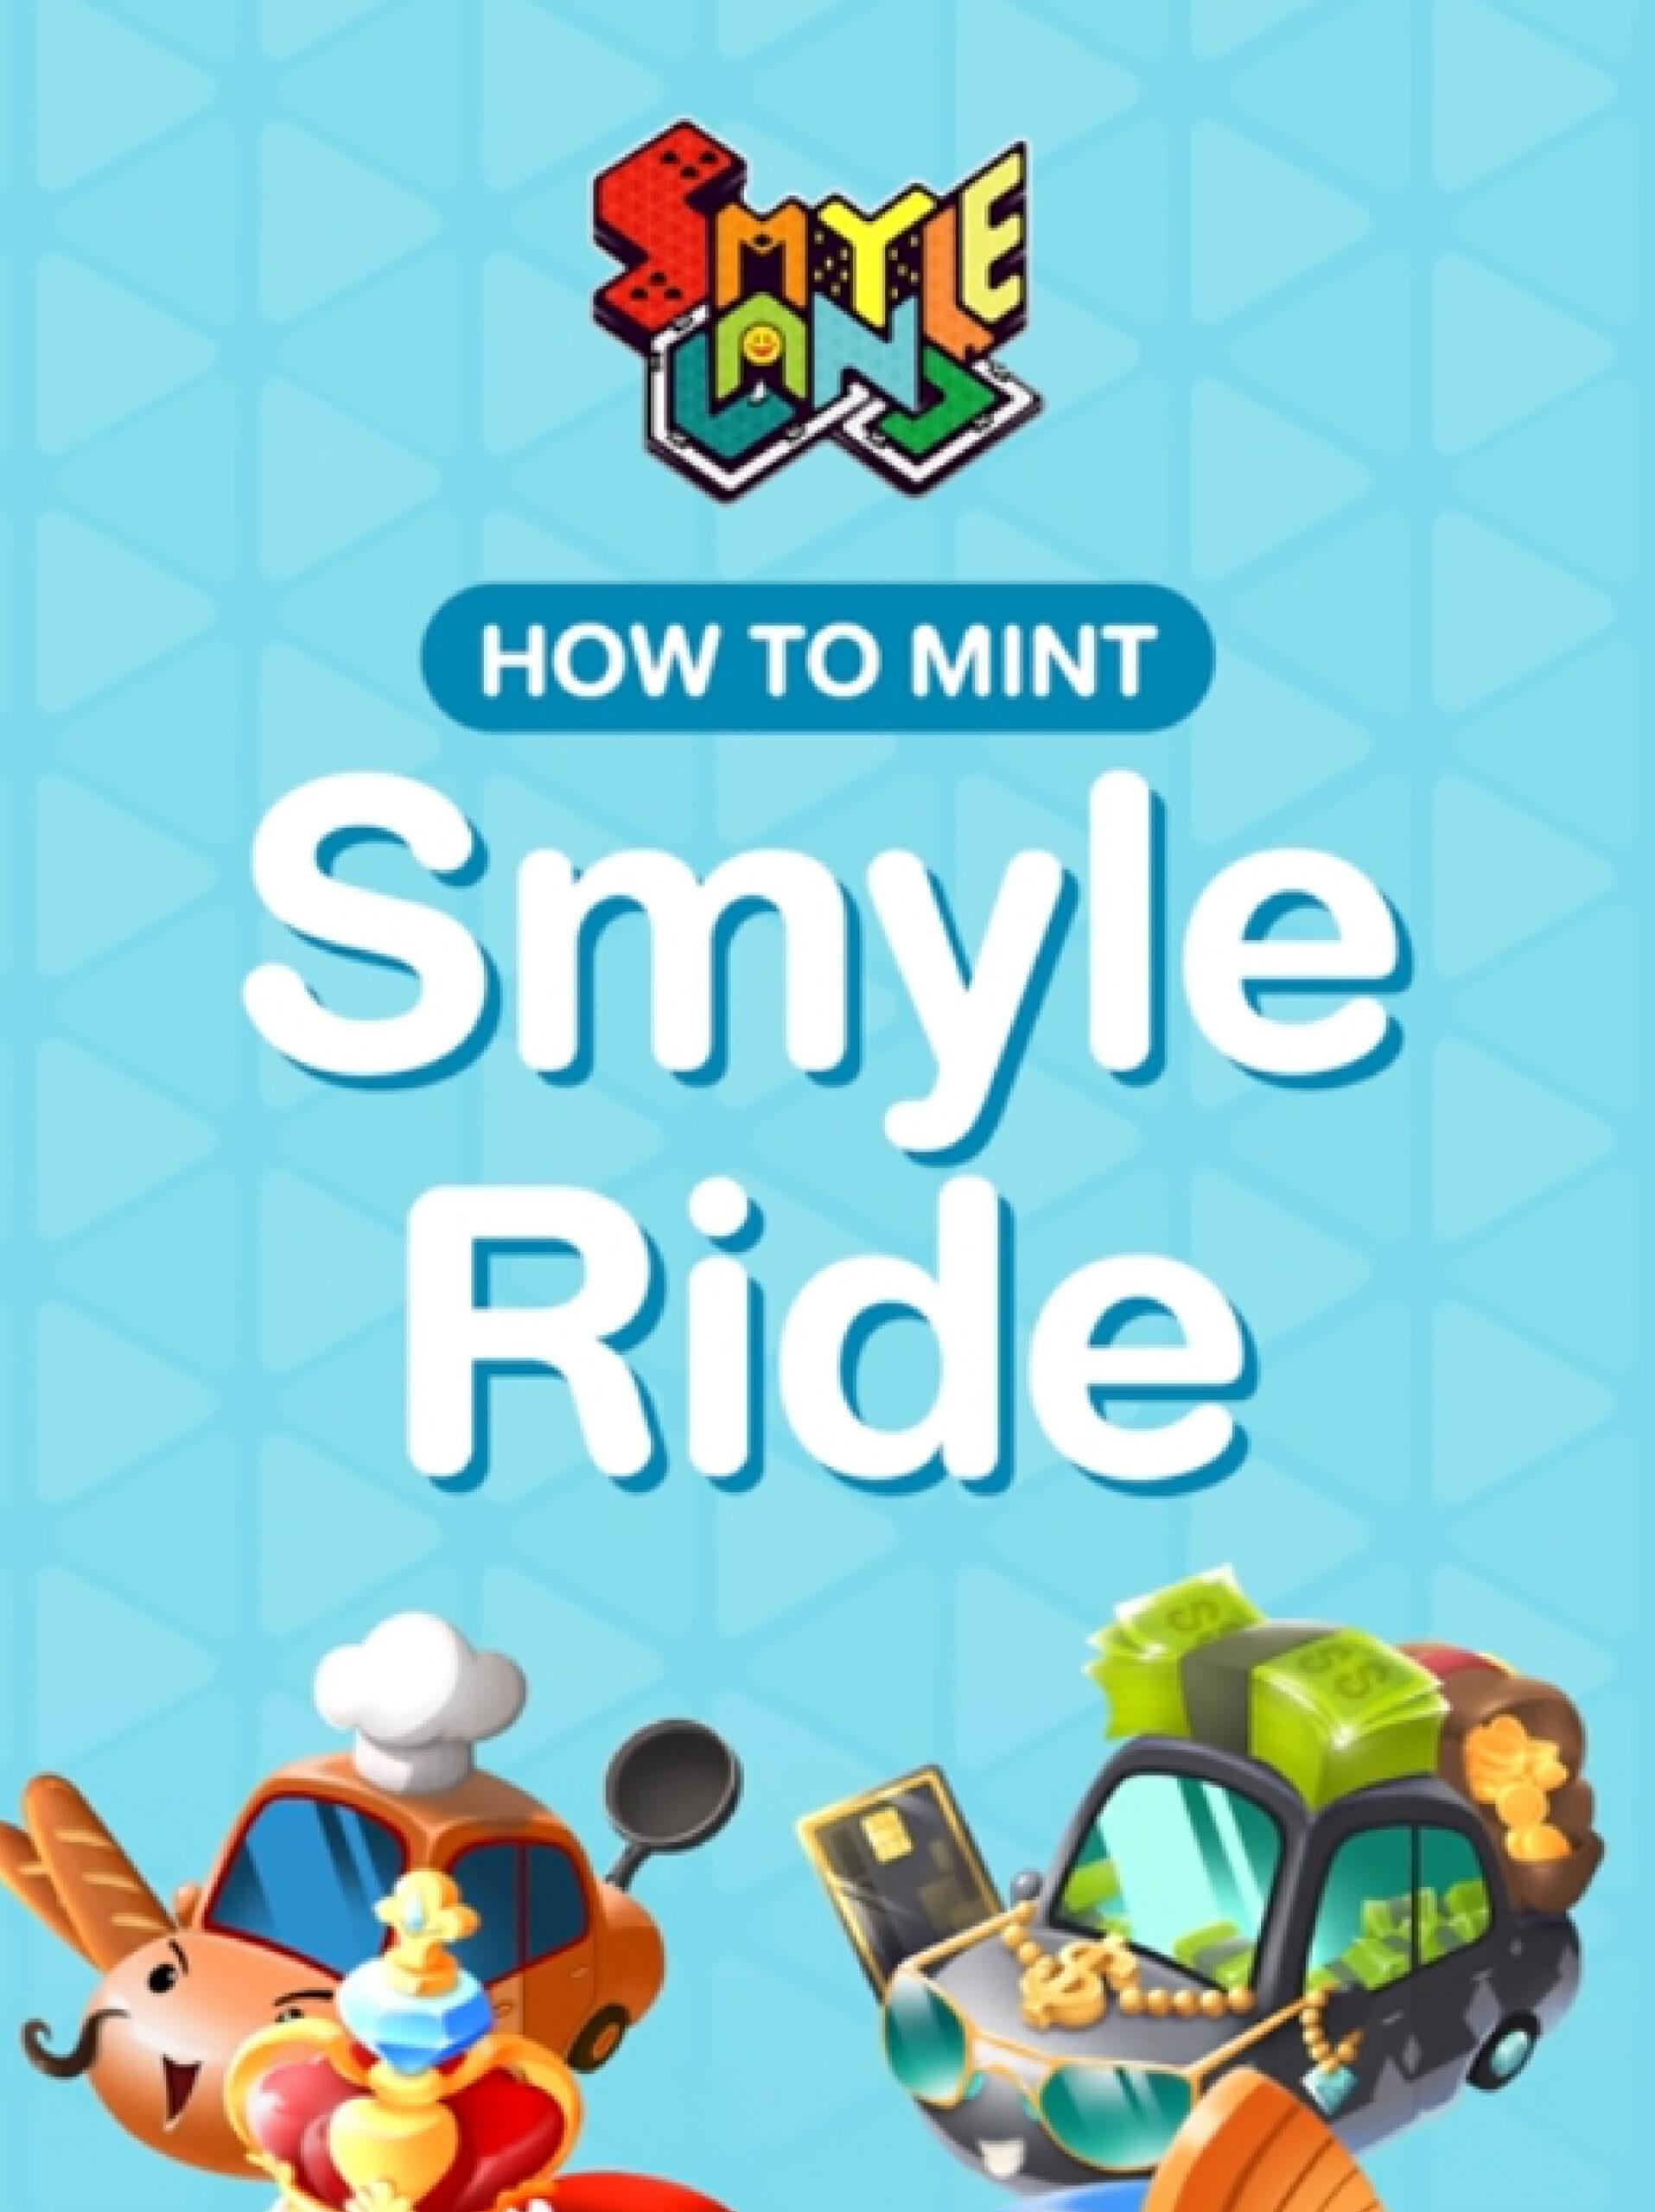 How to Mint